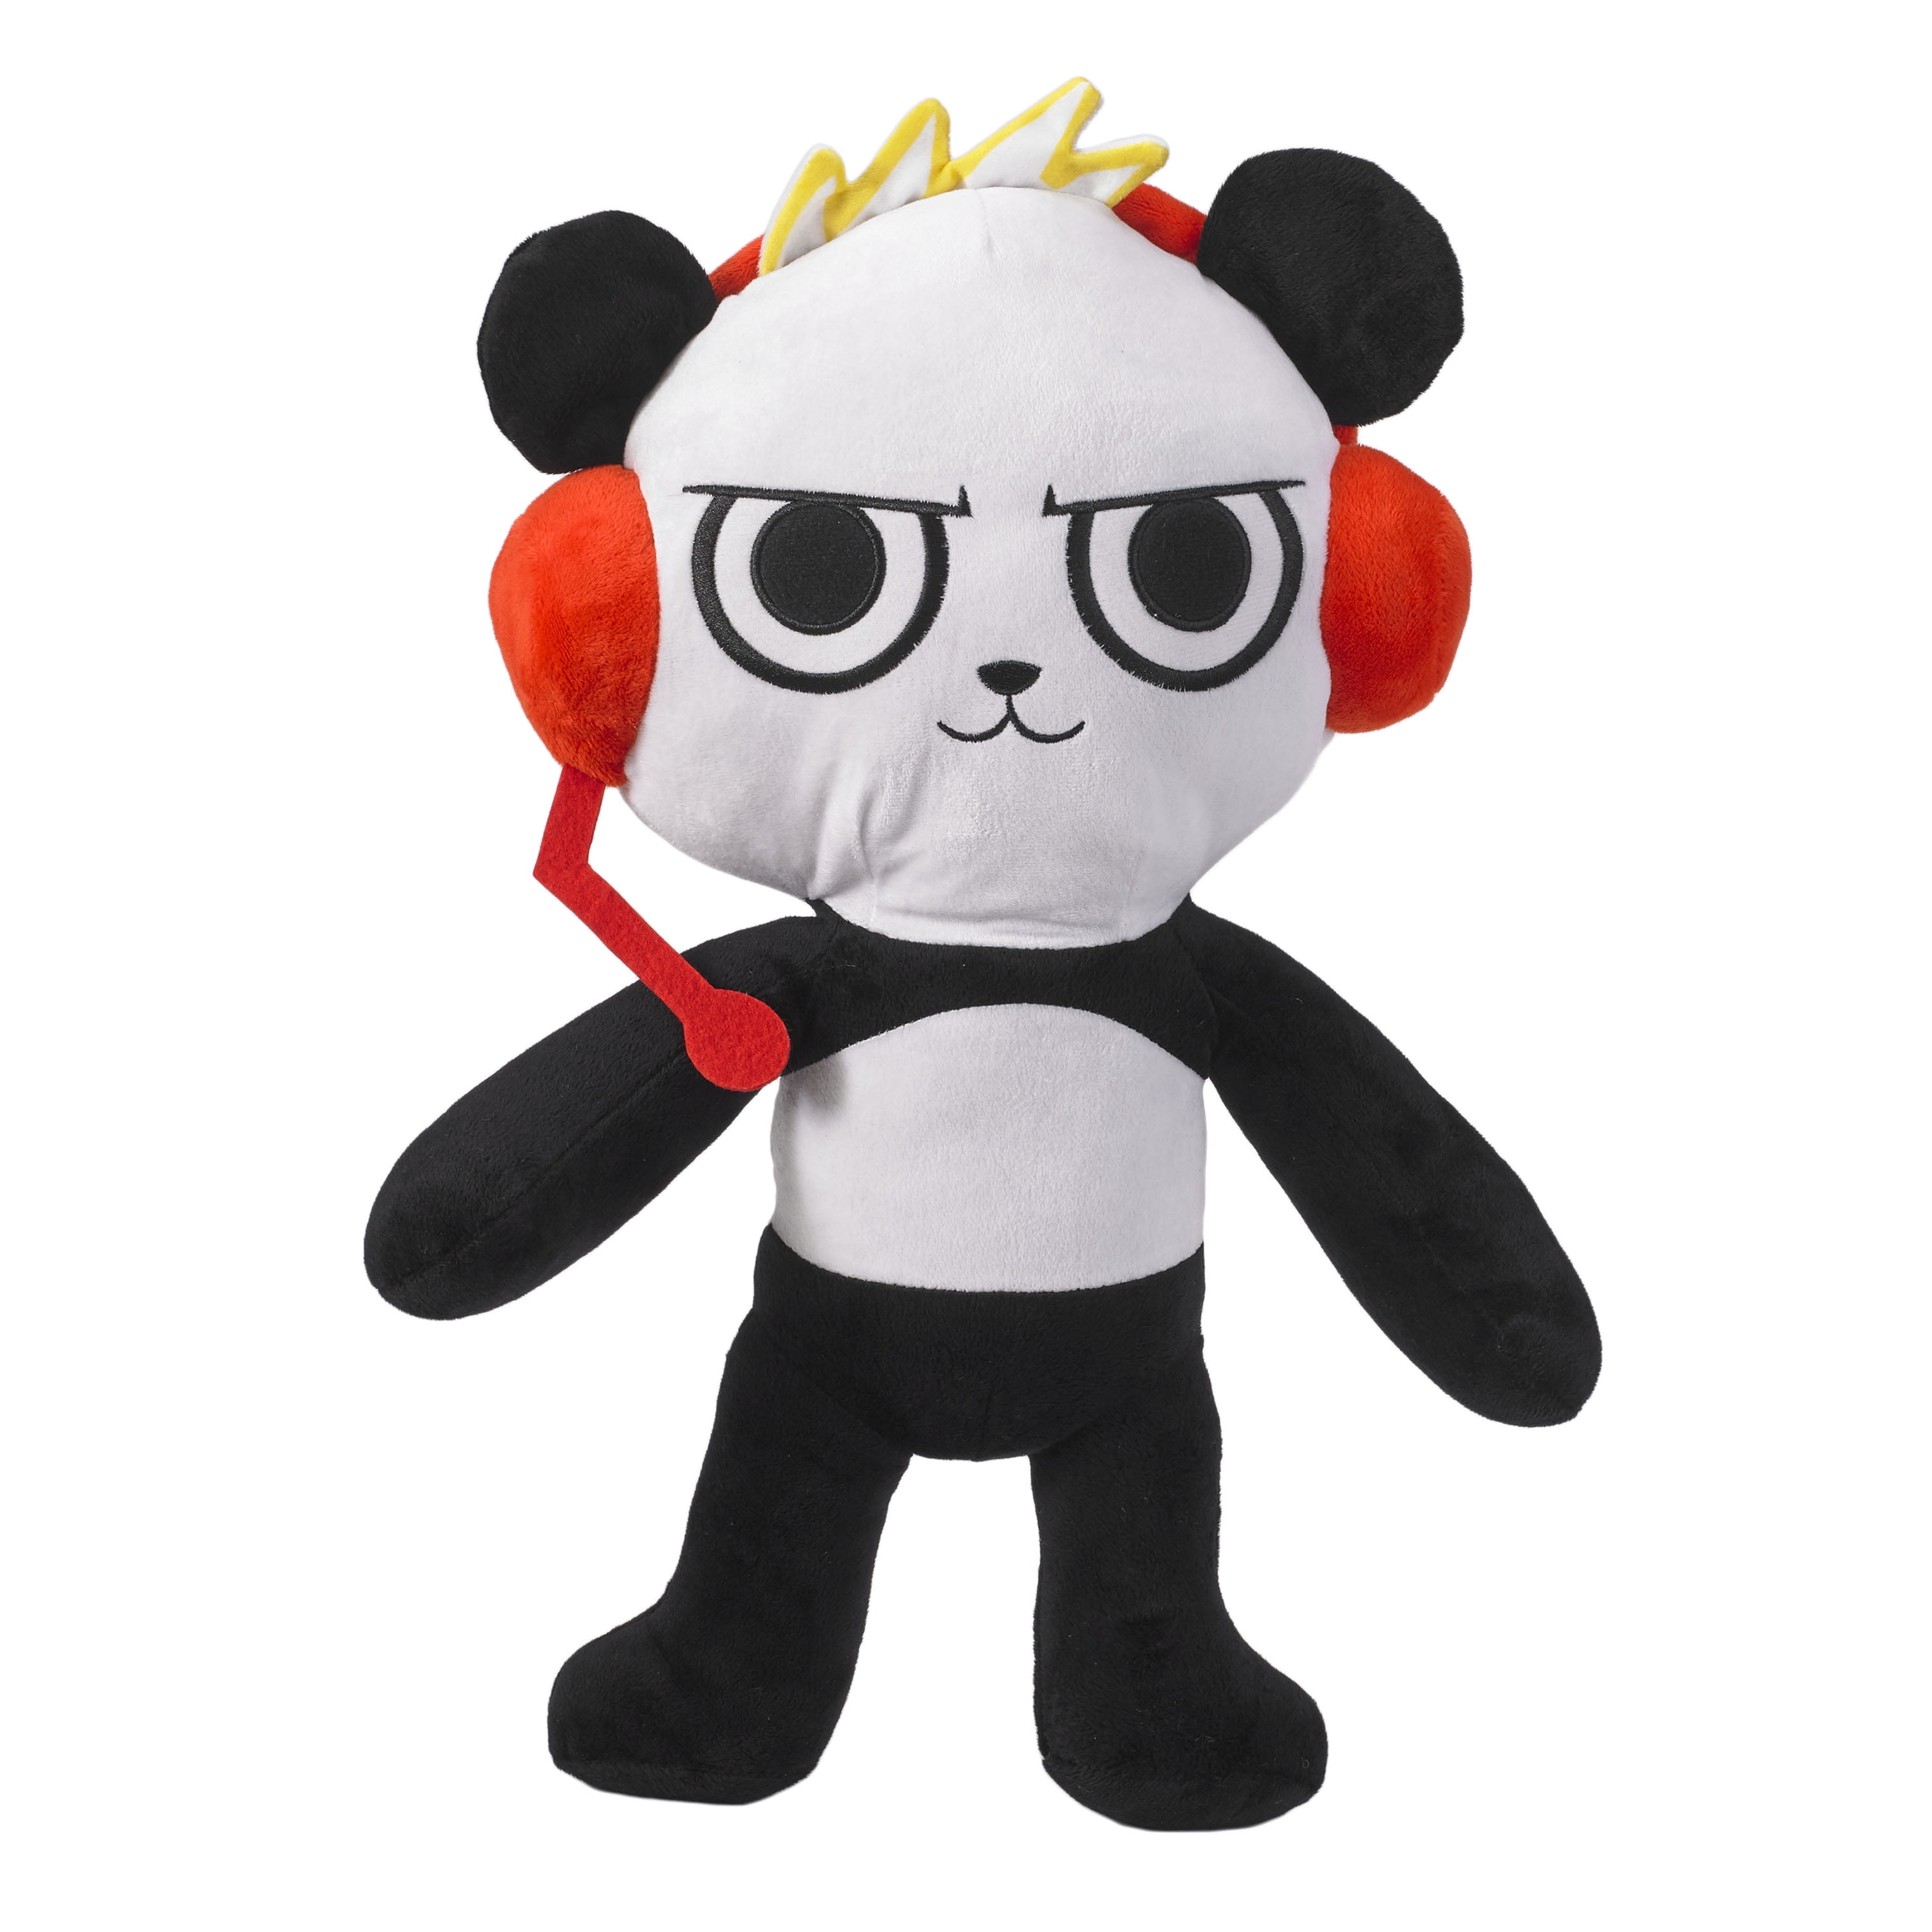 Featured image of post Ryan s World Combo Panda Drawing Bring home the ryan s world boss mode combo panda and the rest of the ryan s world inspired toys and let your little fan bring their own imagination to pretend to use boss mode combo panda s panda vision on the top level